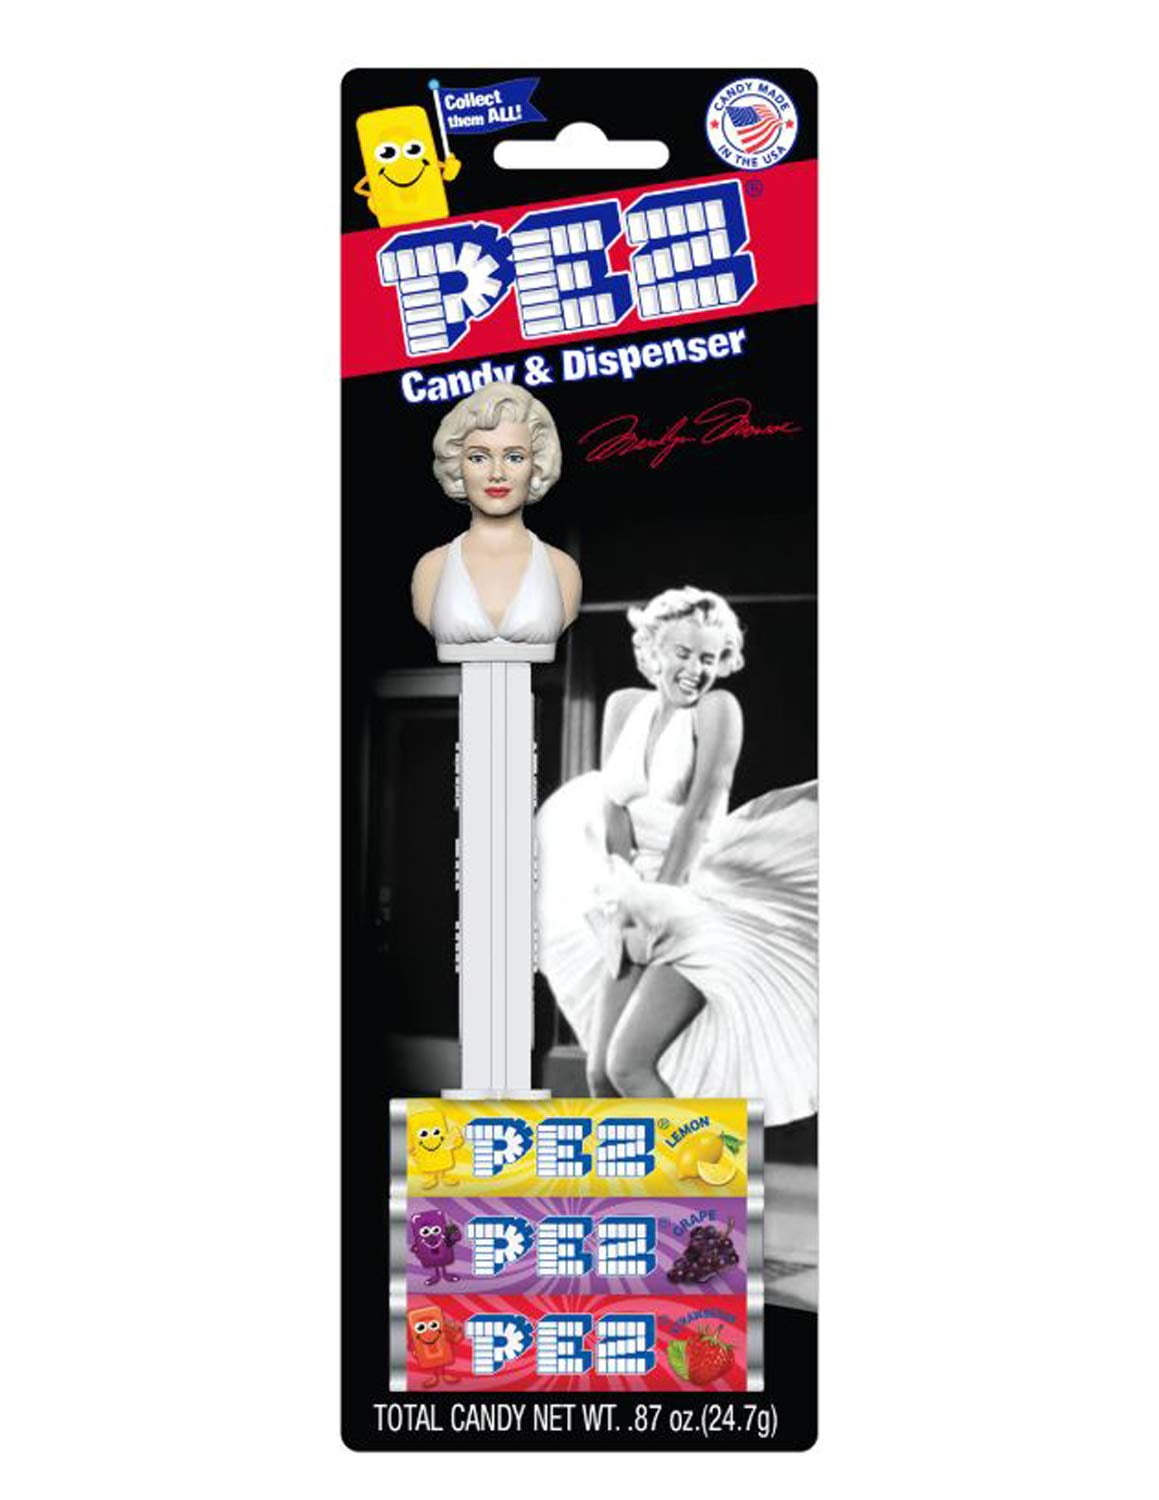 PEZ Exclusive Marilyn Monroe Candy & Dispenser Set! 3 Flavors Grape, Lemon  and Strawberry! Marilyn Monroe Inspired Candy Dispenser! Perfect For All Marilyn  Monroe Fans! - Walmart.com